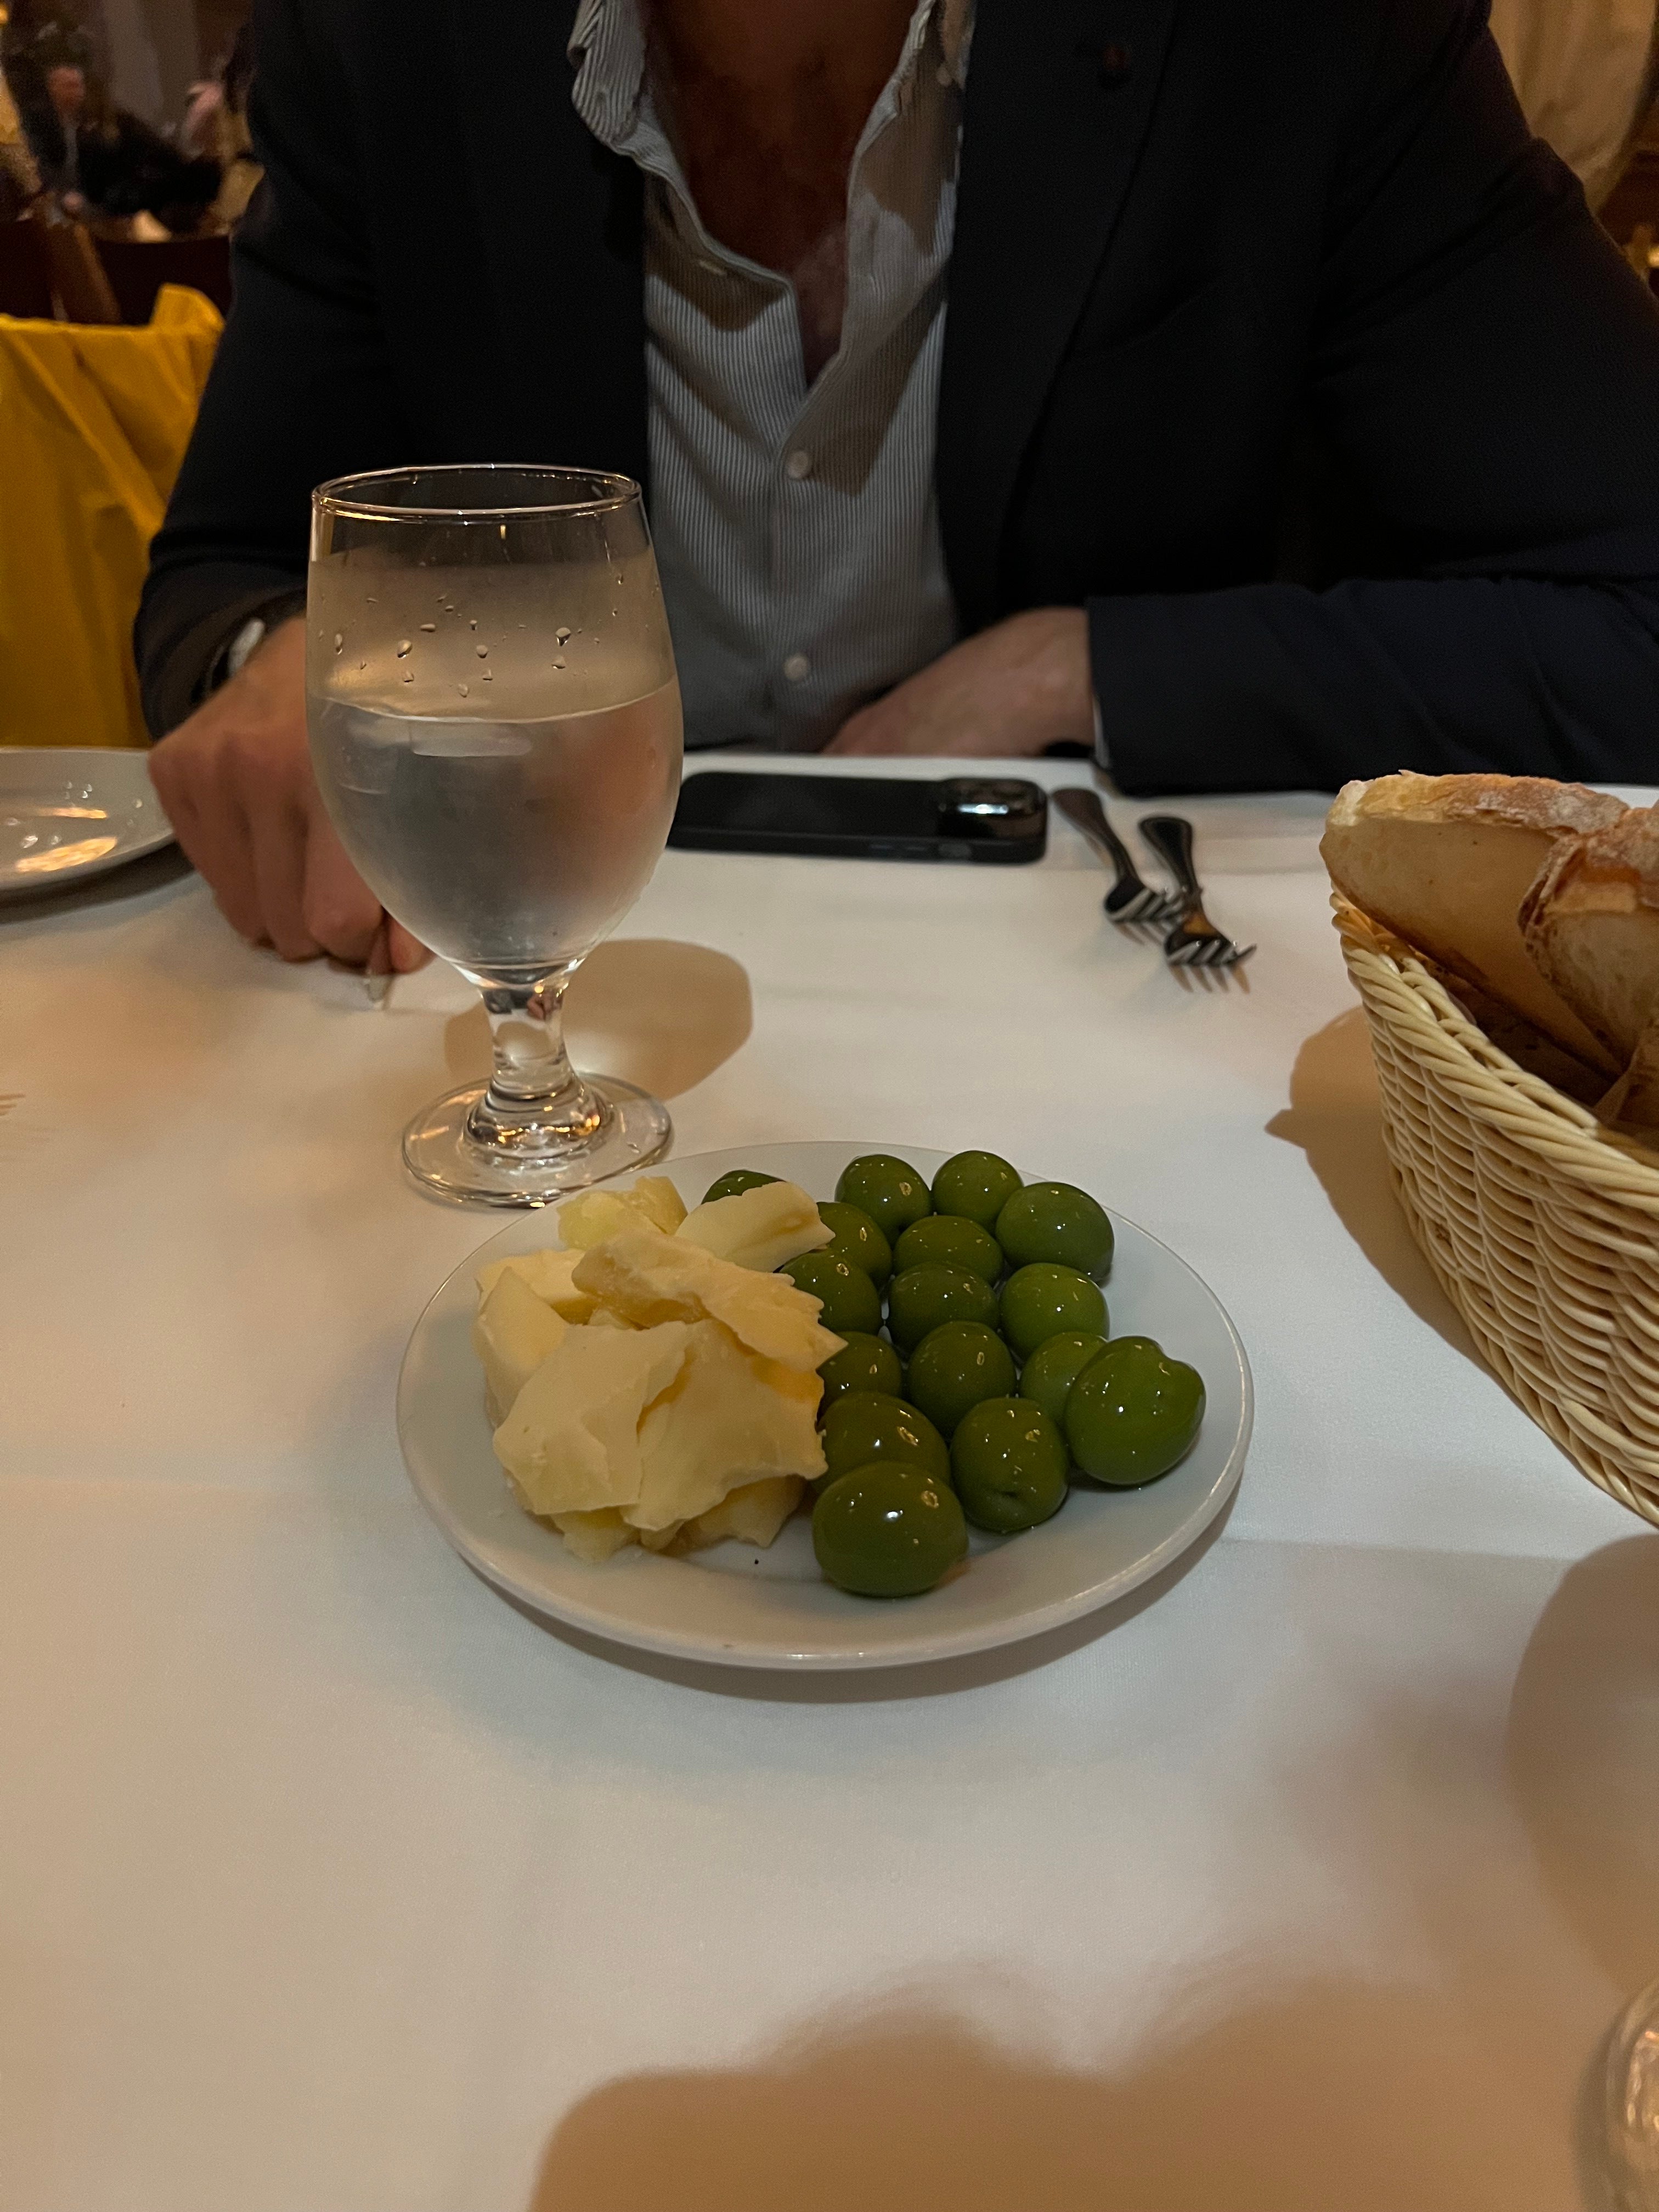 A plate of green olives and cheese.